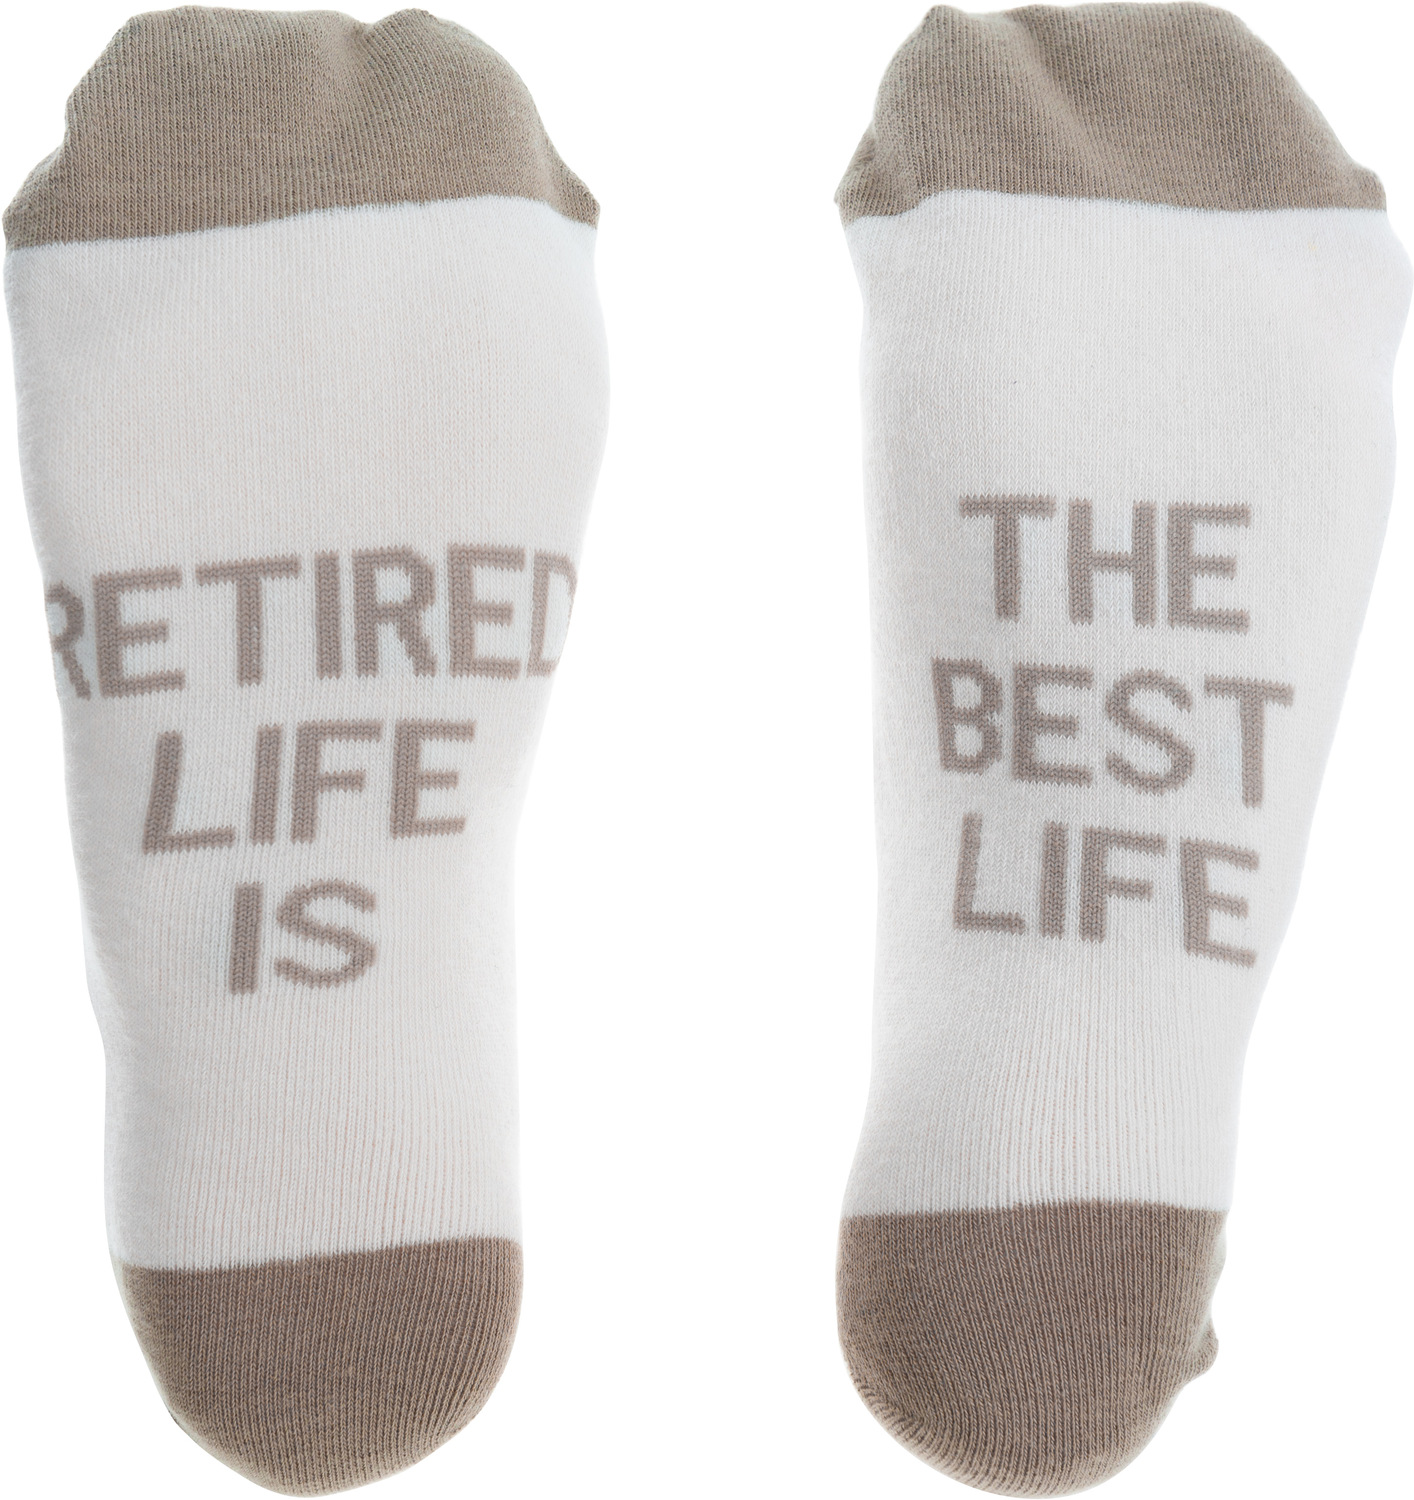 Best Life by Retired Life - Best Life - S/M Cotton Blend Sock